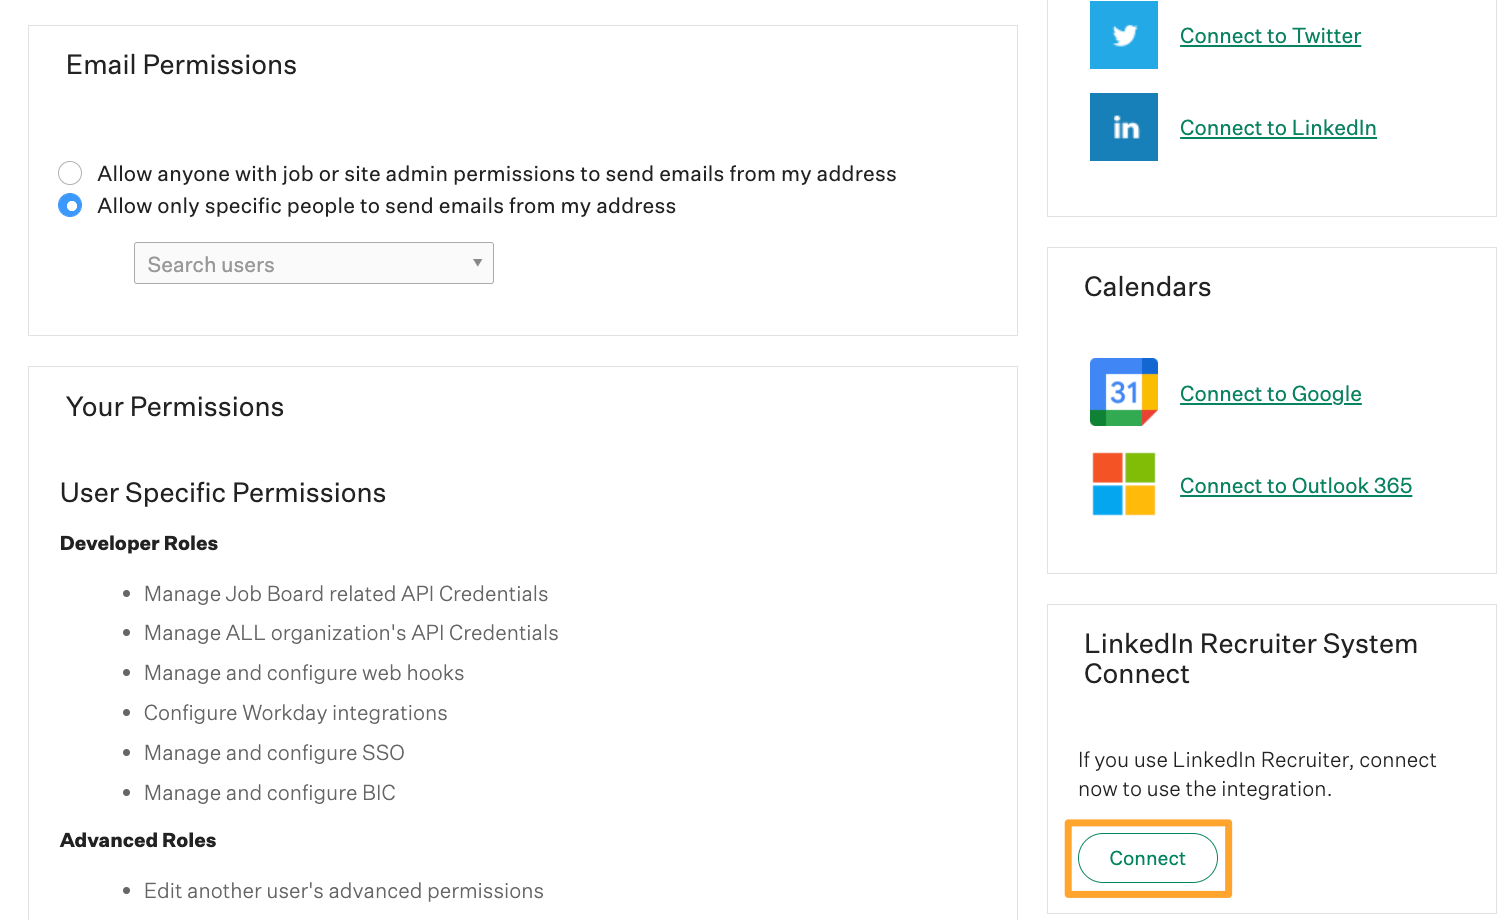 The LinkedIn Recruiter System Connect panel is shown with the Connect button highlighted